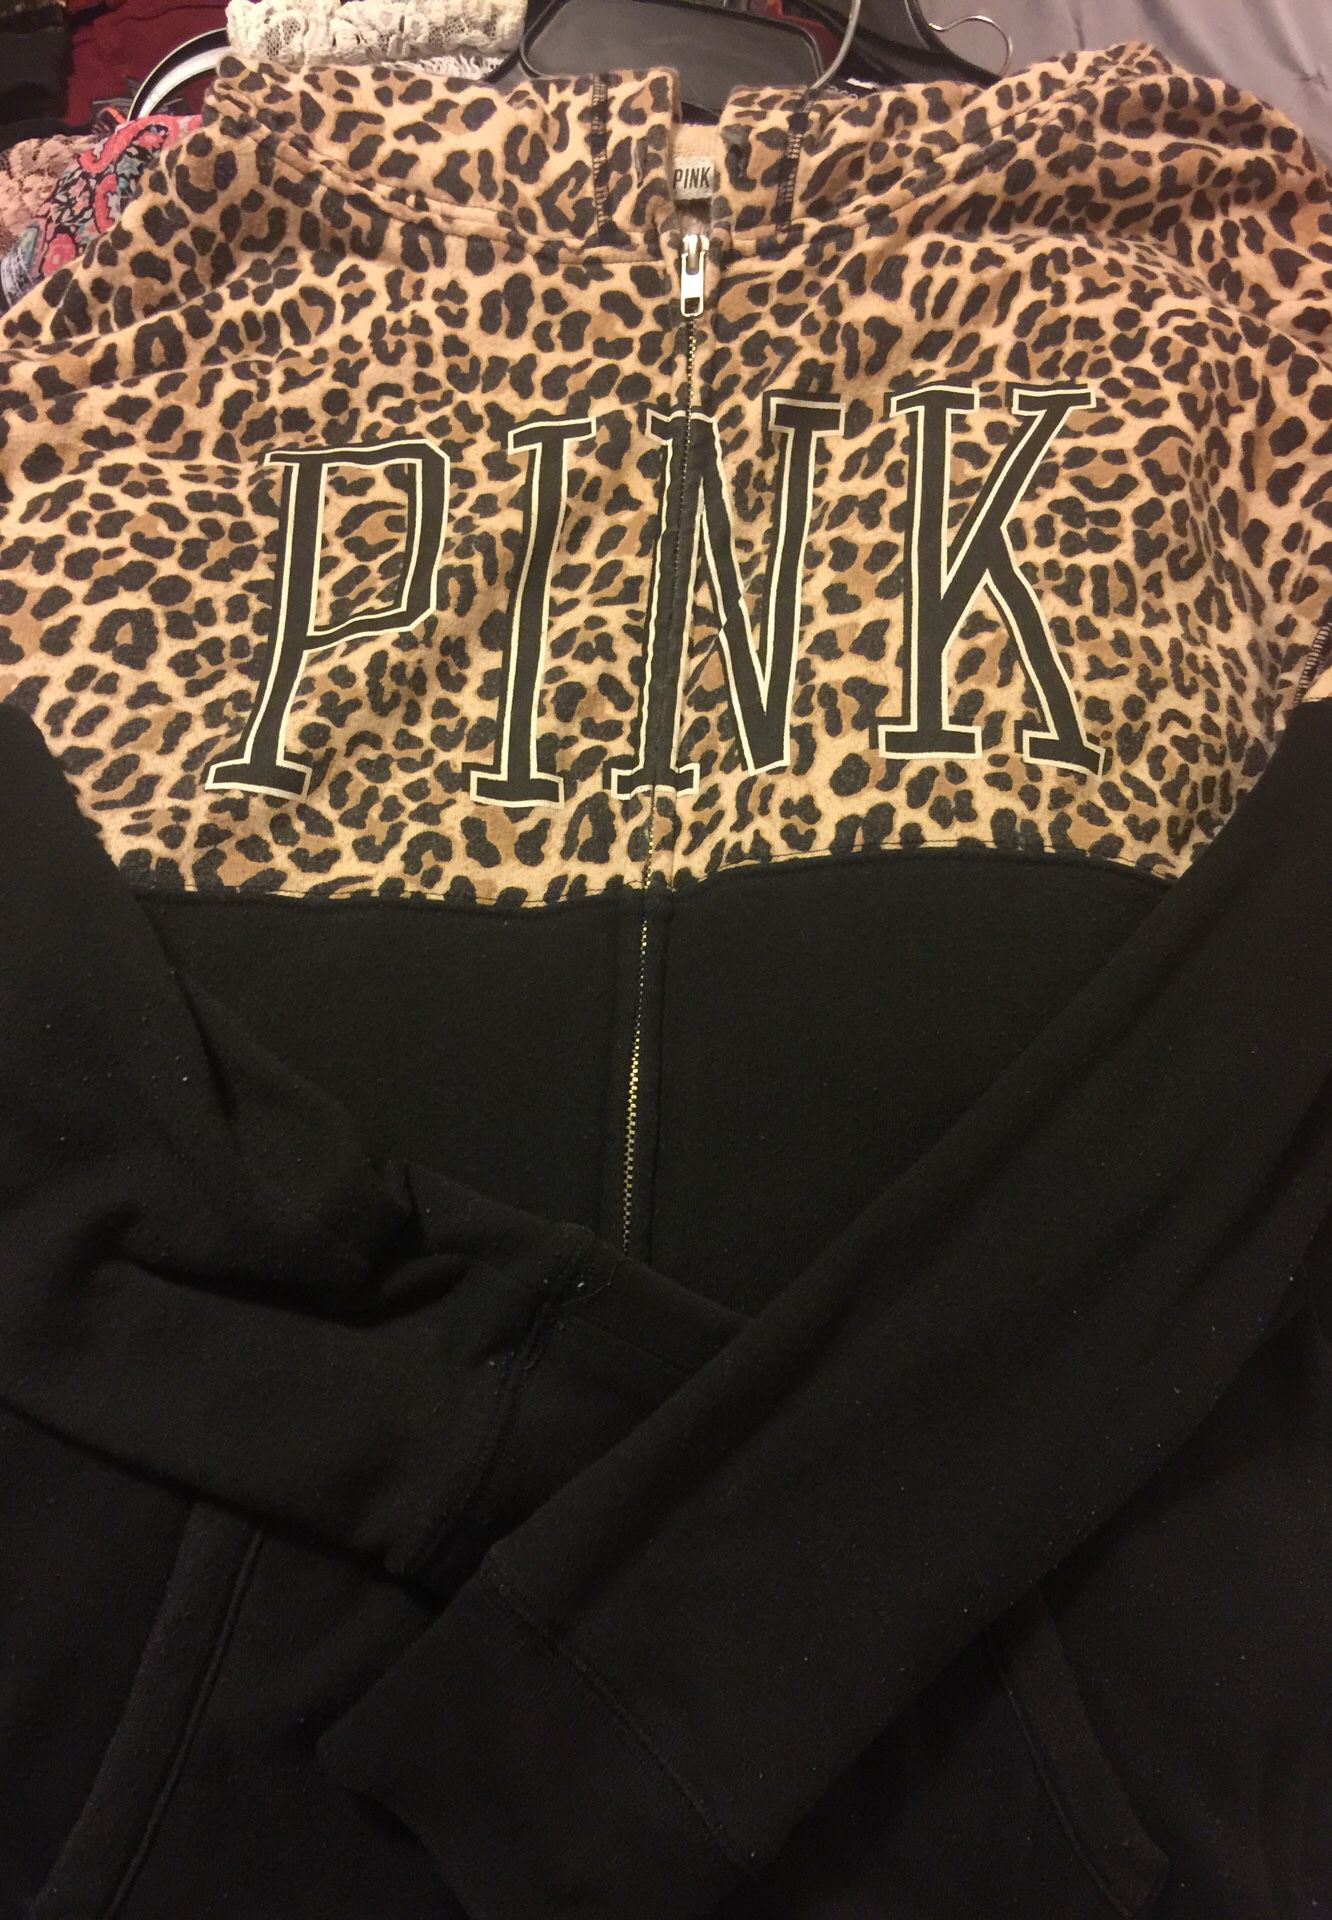 PINK Long-Sleeved Leopard Jacket with Hoodie size large